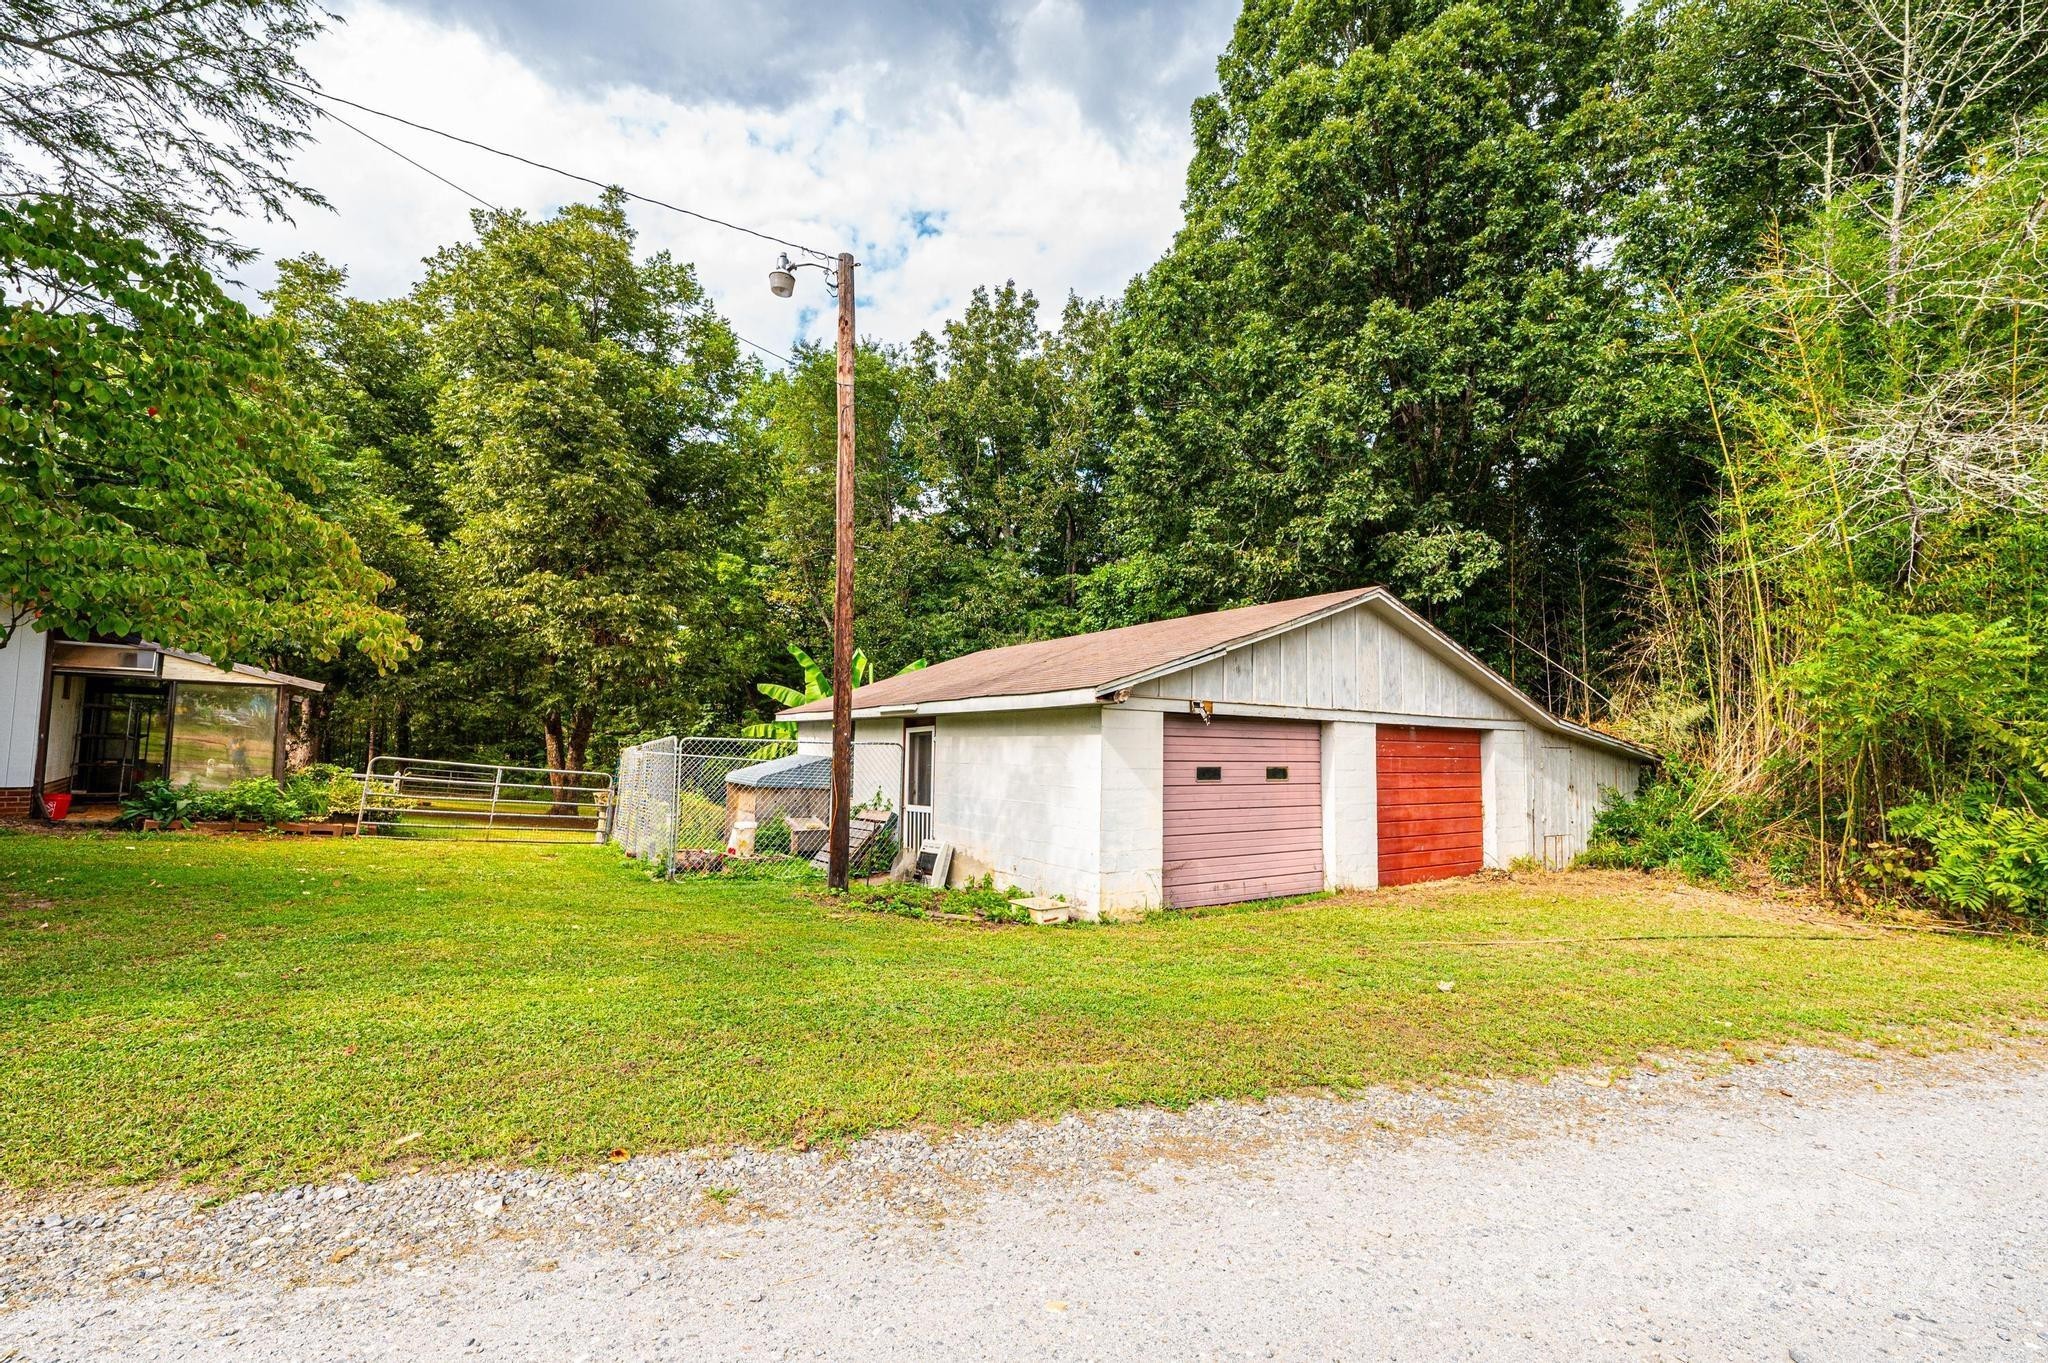 24. 2089 Connelly Springs Road